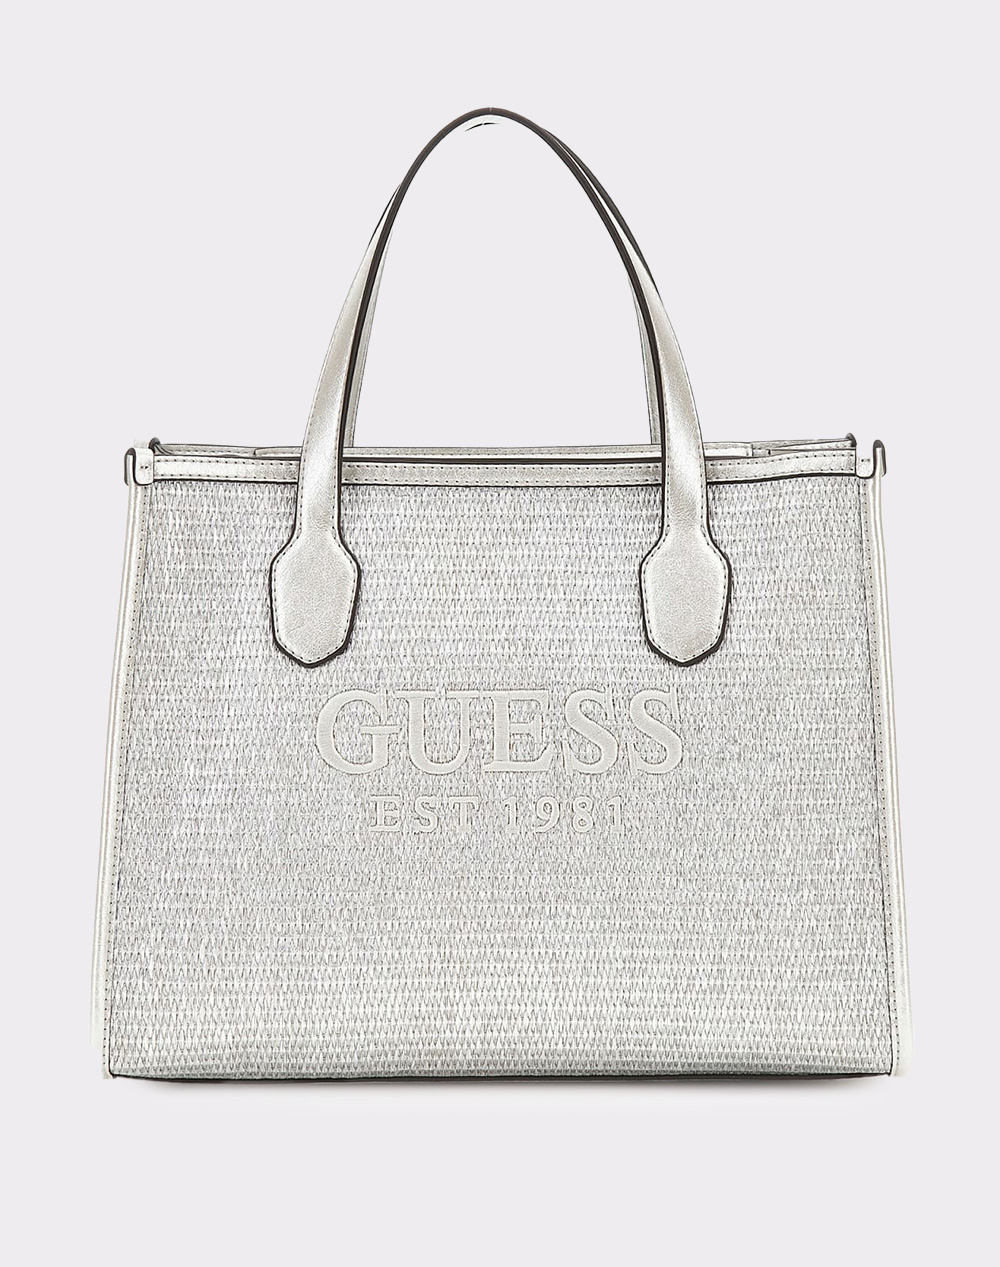 GUESS SILVANA 2 COMPARTMENT TOTE ΤΣΑΝΤΑ ΓΥΝΑΙΚΕΙΟ (Διαστάσεις: 33 x 26 x 12 εκ.) HWWY8665220-SIL MetallicSilver 3810AGUES6200908_3494